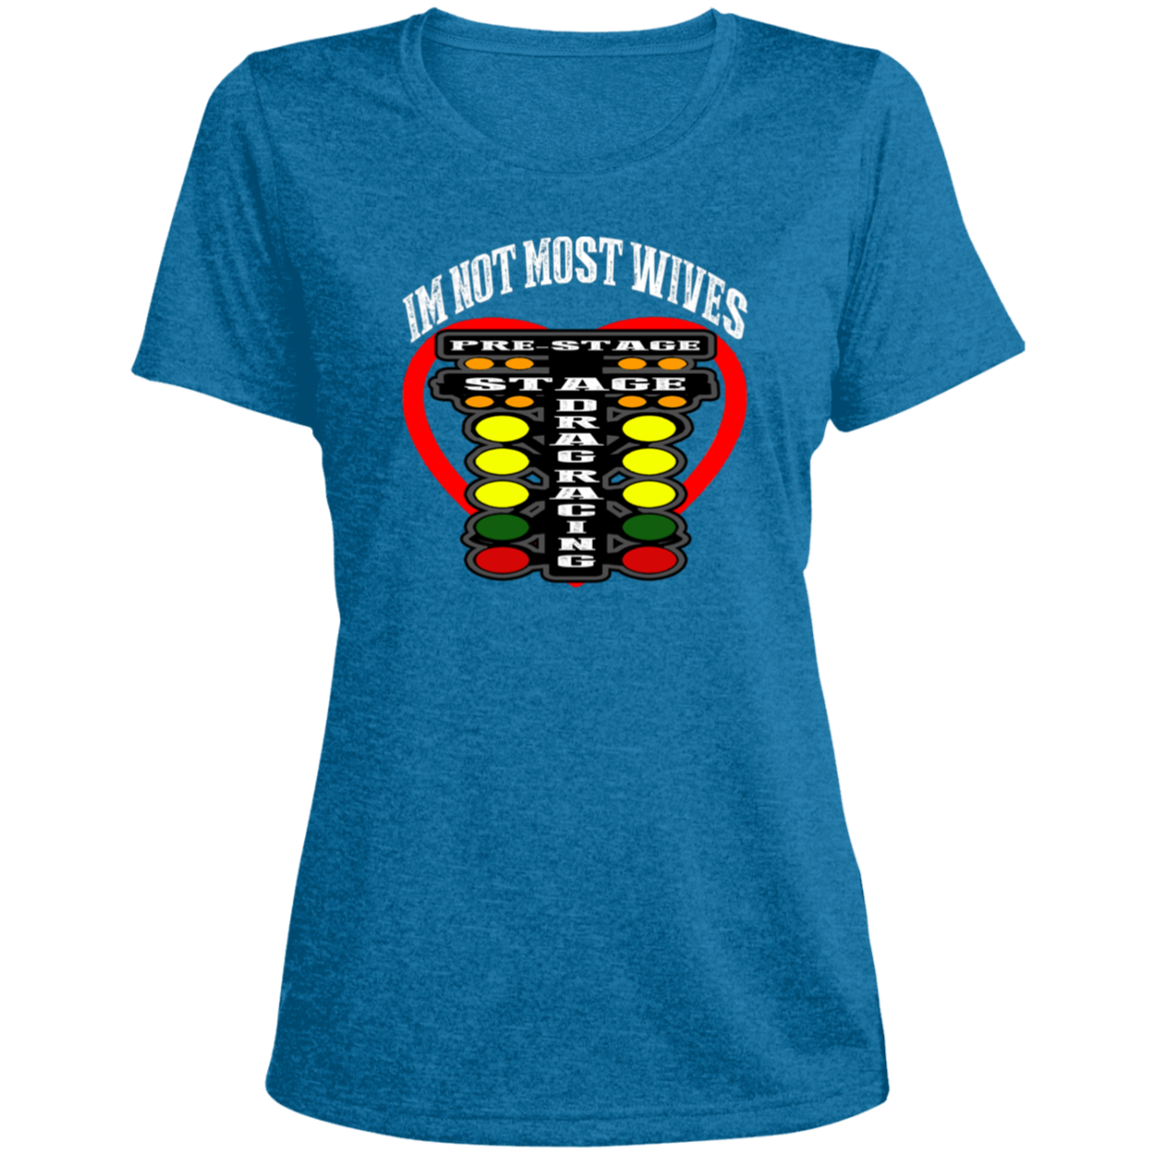 I'm Not Most Wives Drag Racing Ladies' Heather Scoop Neck Performance Tee